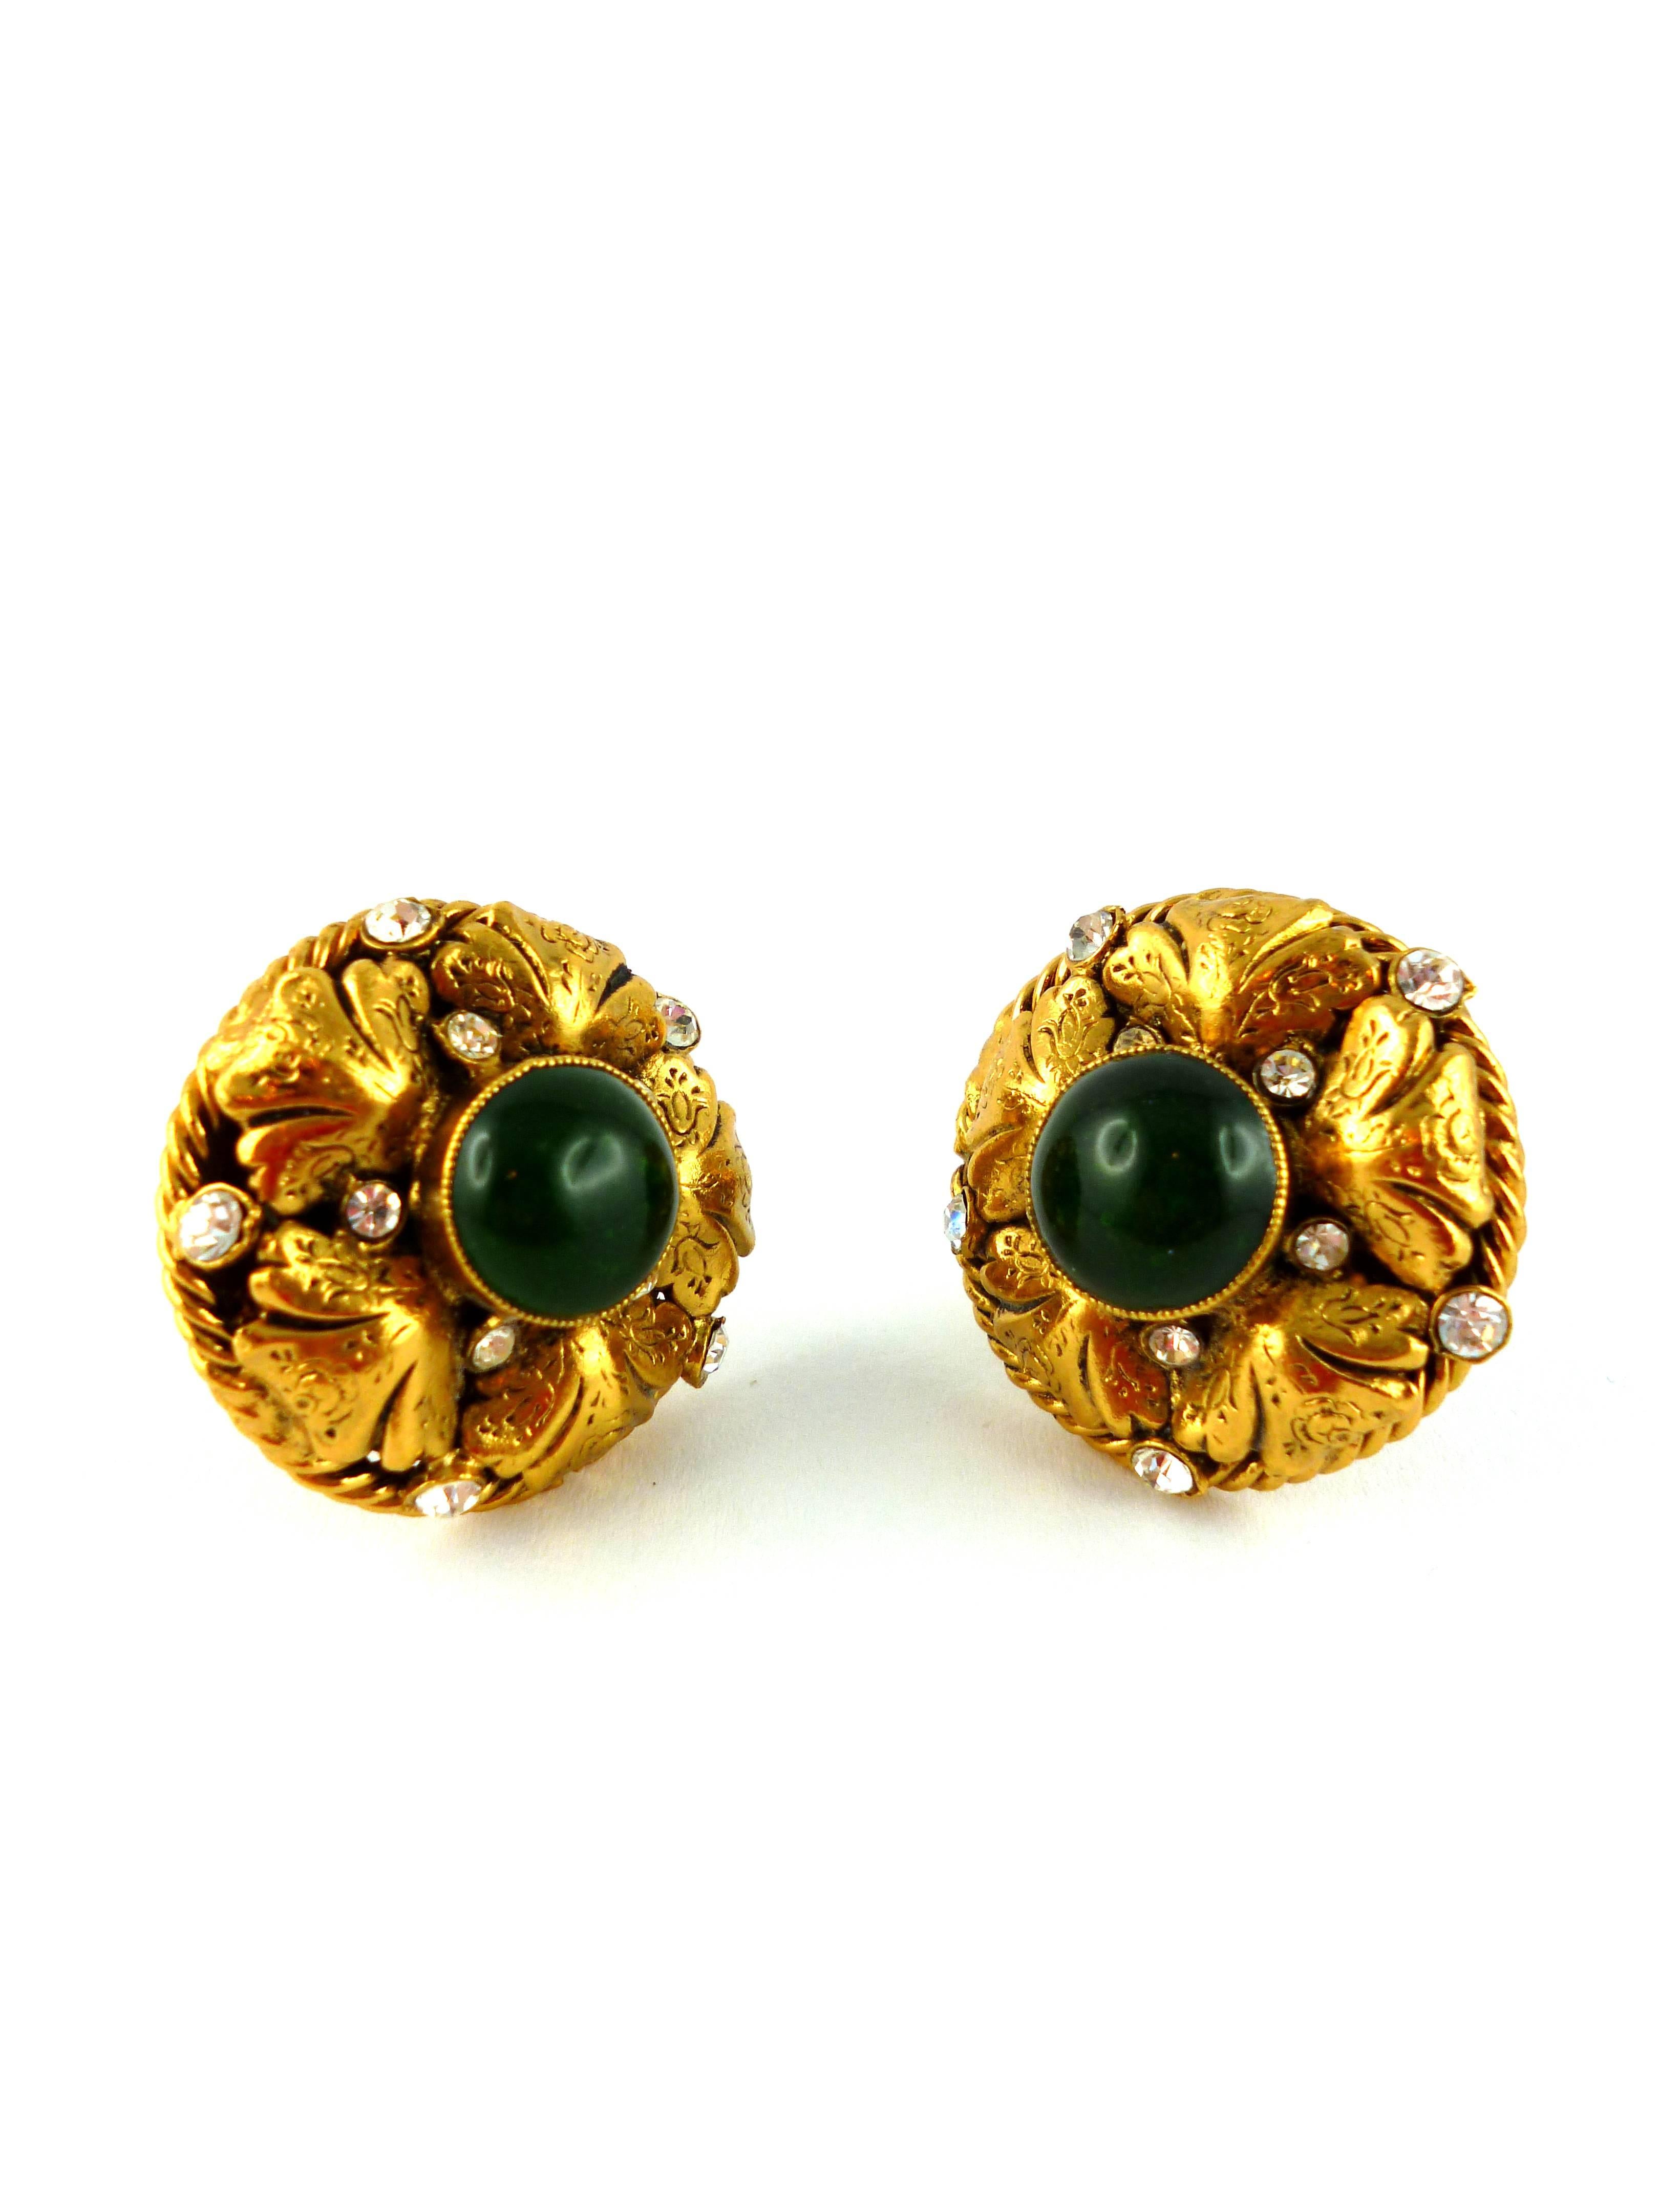 Women's Chanel Vintage Gripoix Glass and Rhinestone Filigree Clip-On Earrings Fall 95